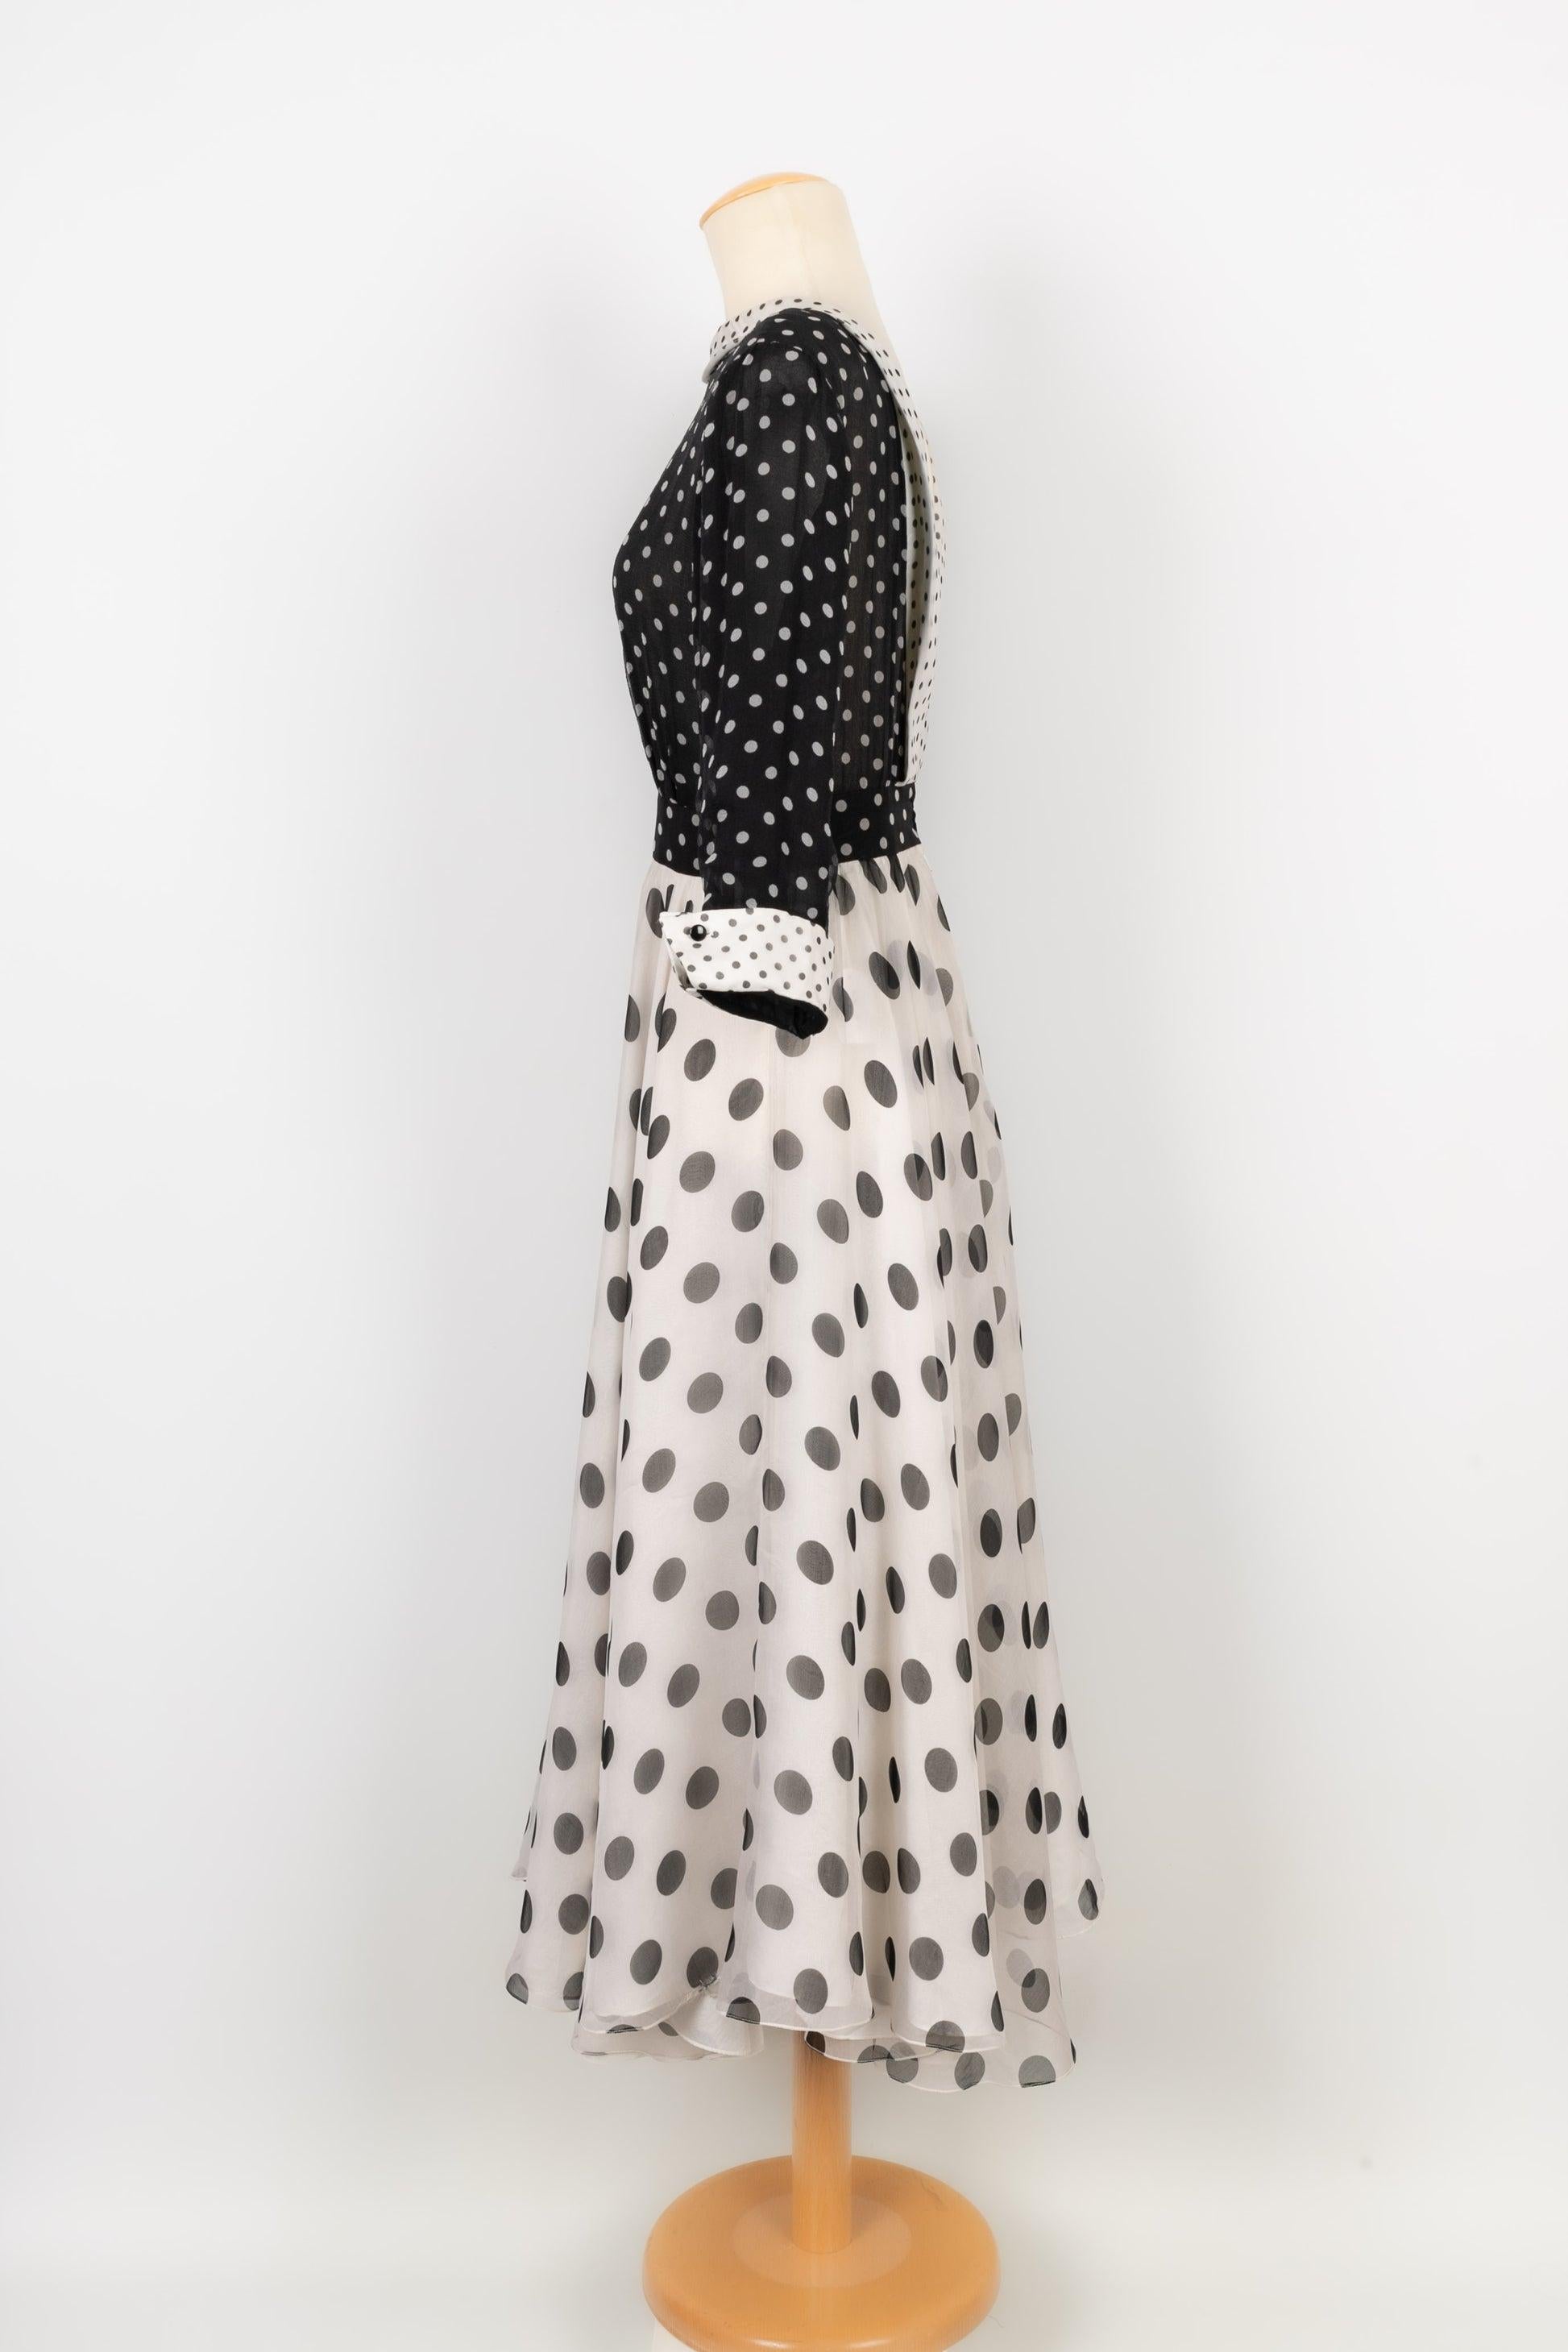 Nina Ricci - (Made in France) Dress in black muslin with white polka dots, draped scoop neck low-cut on the back. Indicated size 42FR.

Additional information:
Condition: Very good condition
Dimensions: Shoulder width: 41 cm - Chest: 46 cm - Waist: